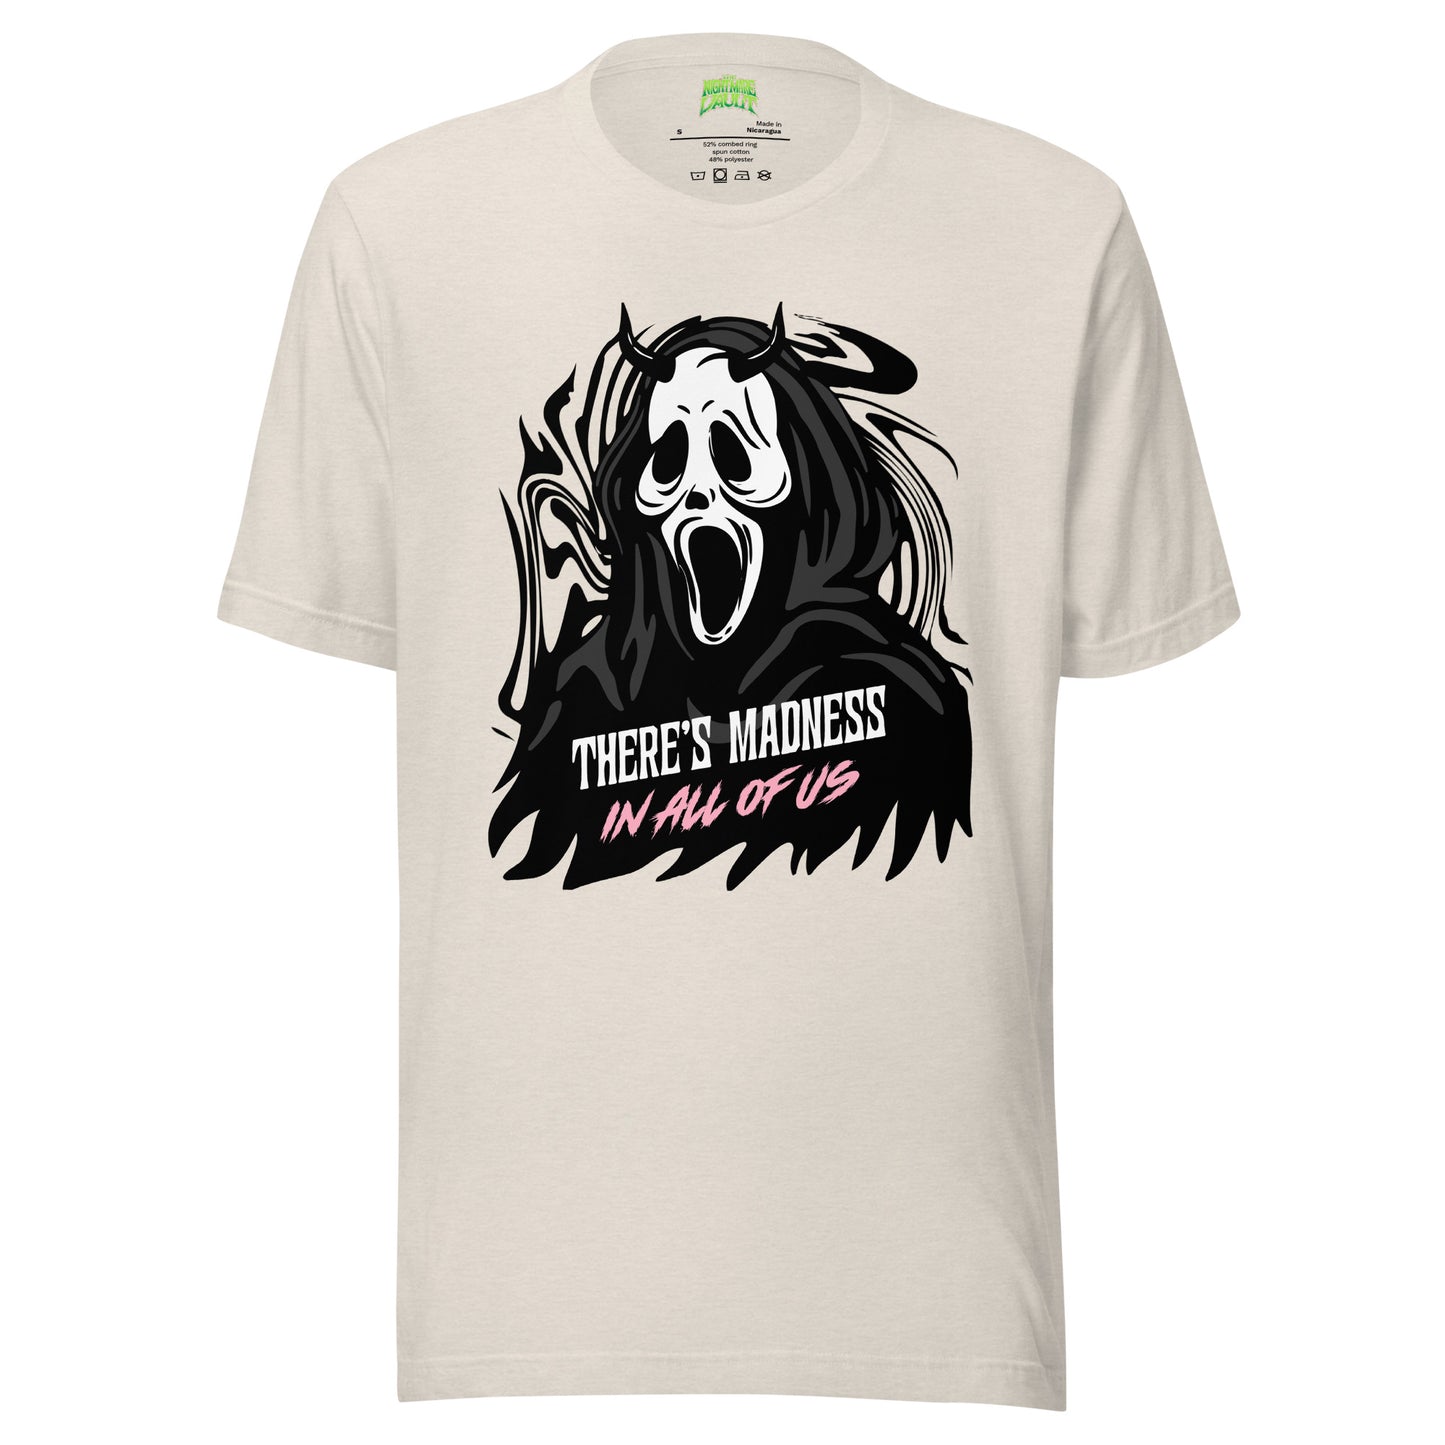 There's Madness in All of Us tee